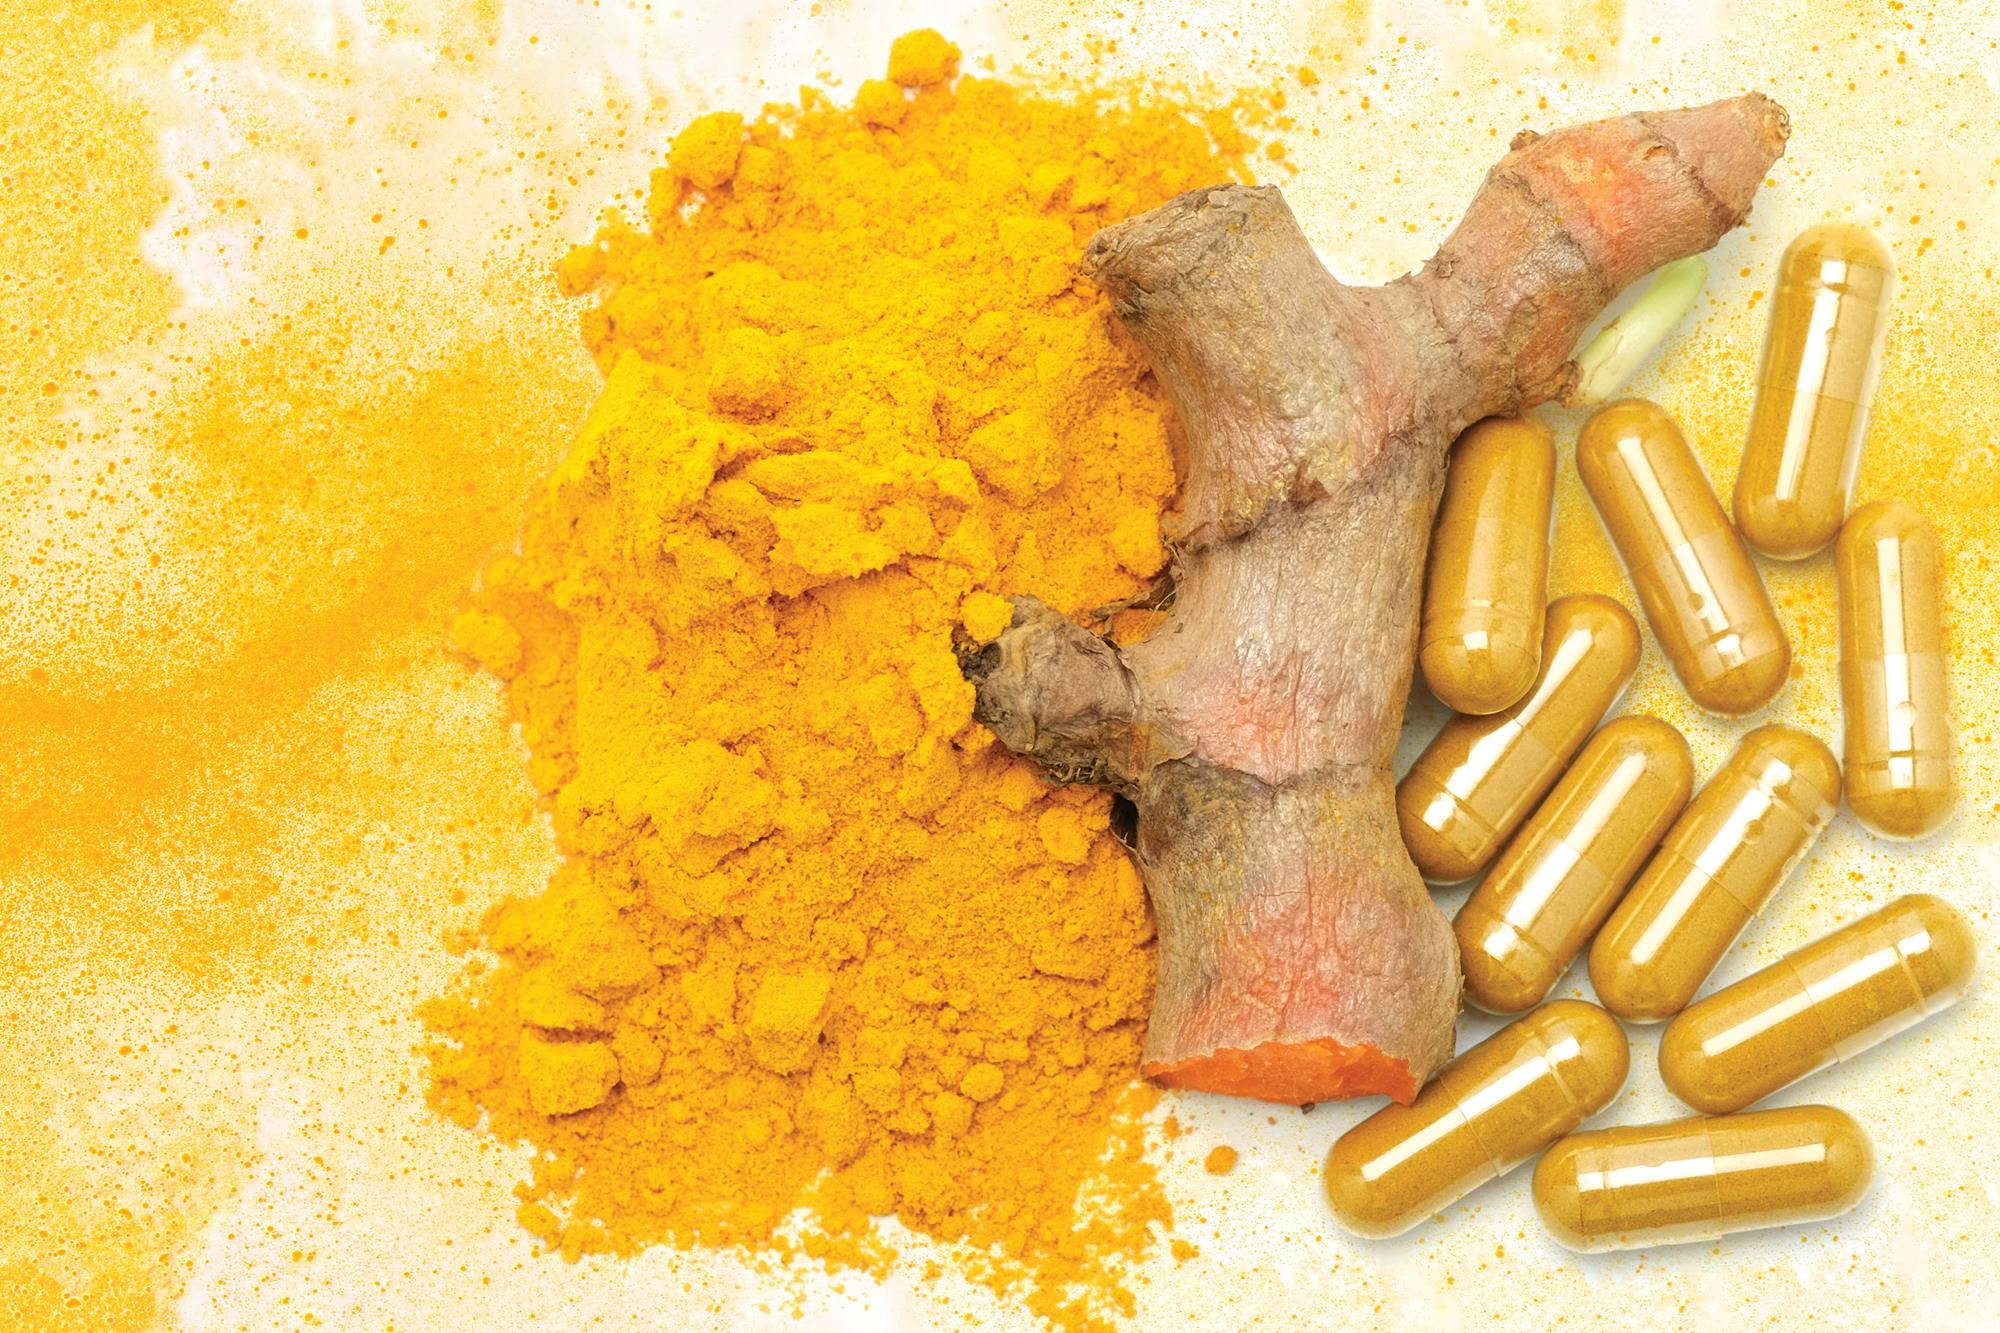 Separating turmeric fact from fiction | Feature | Chemistry World